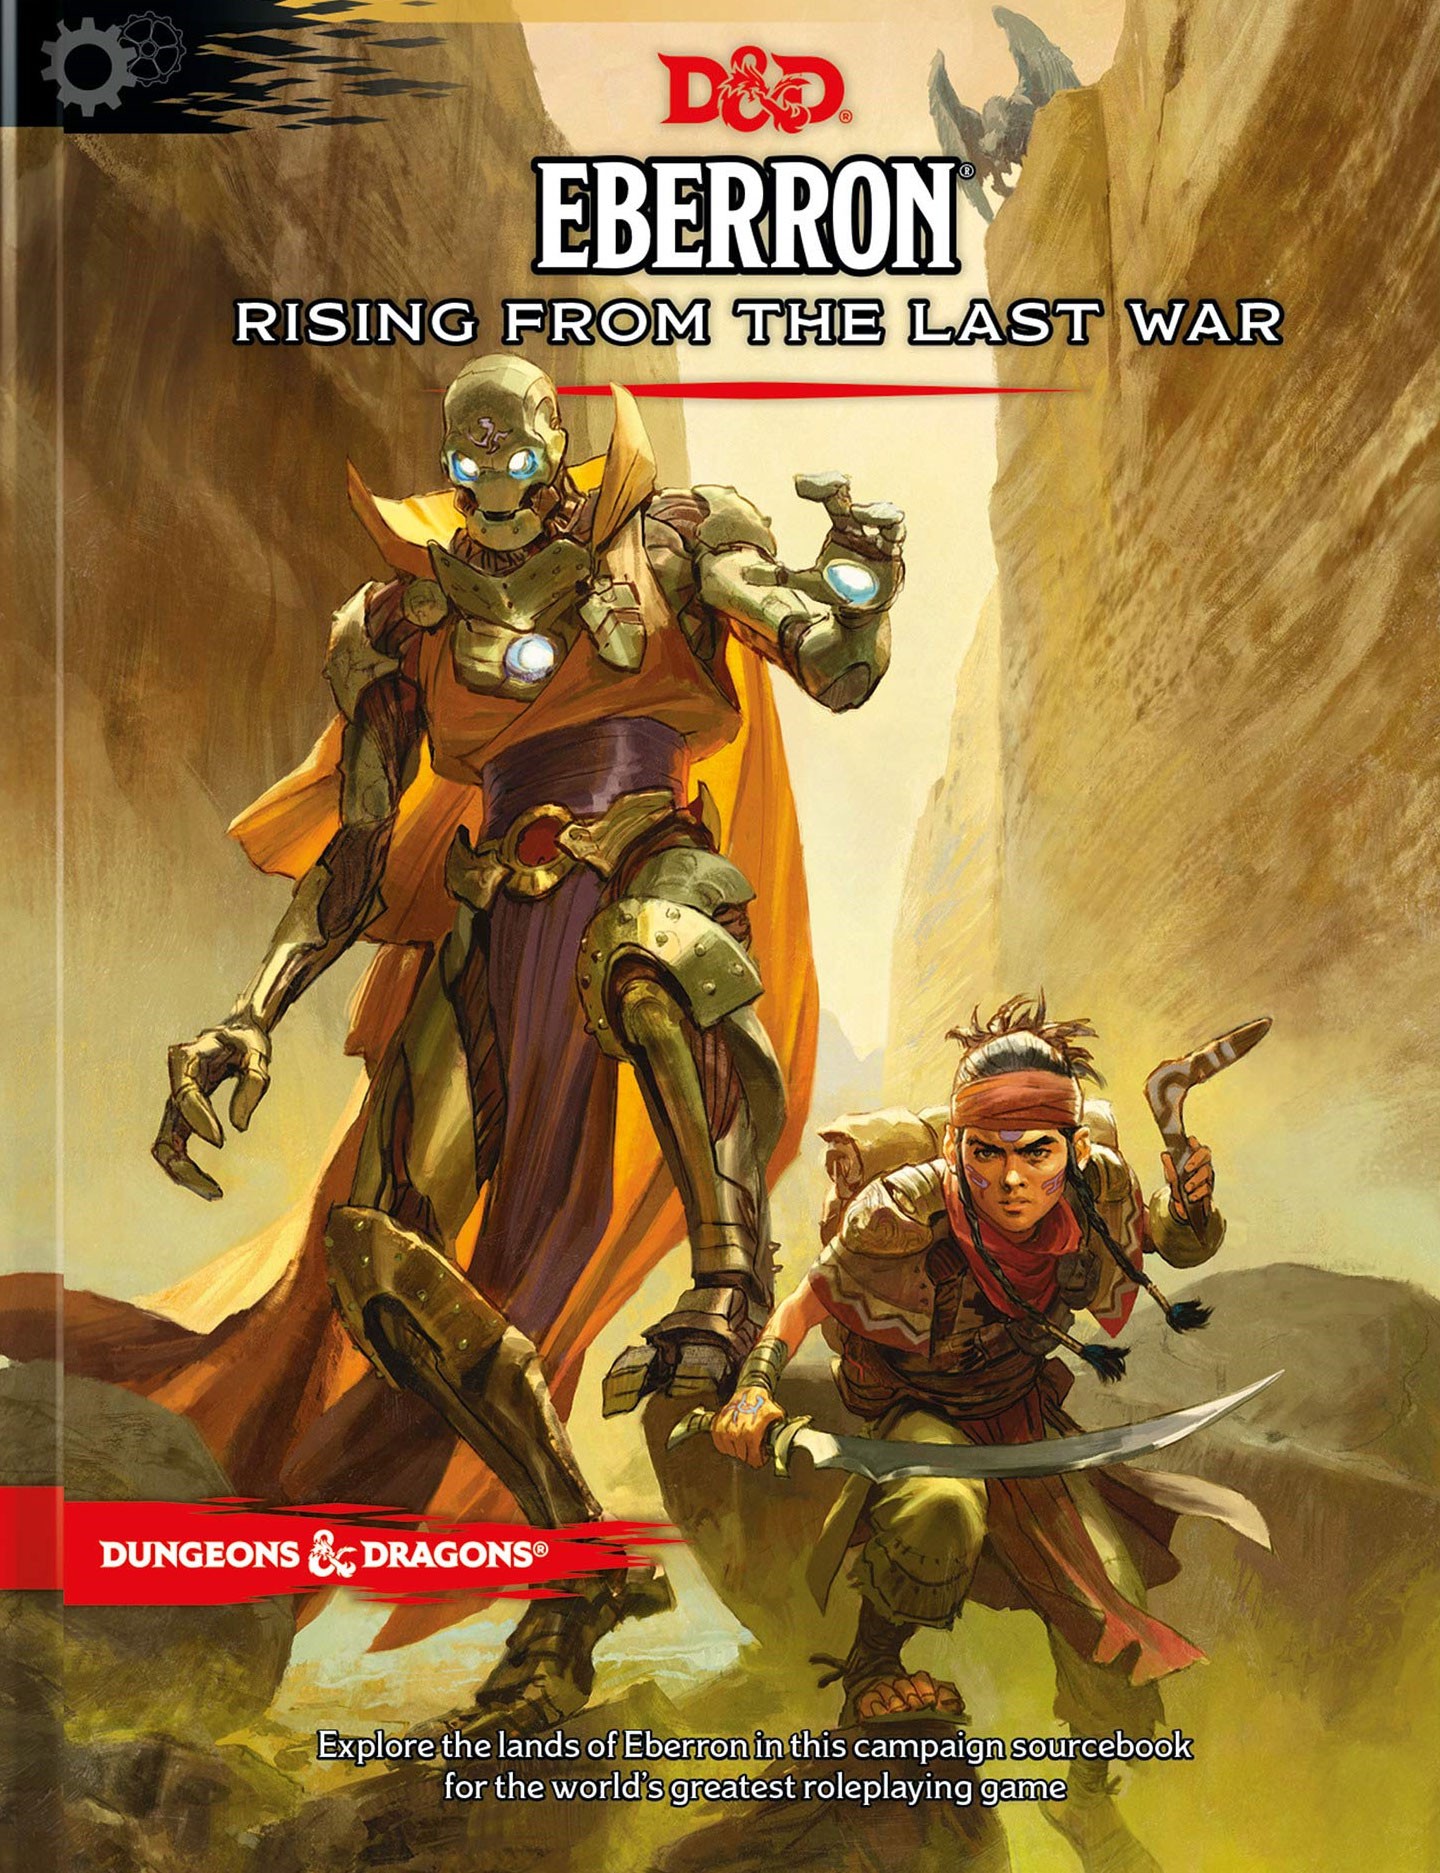 by Wizards RPG Team d&d Campaign Setting and Adventure Book for sale online Eberron: Rising from the Last War 2019, Hardcover